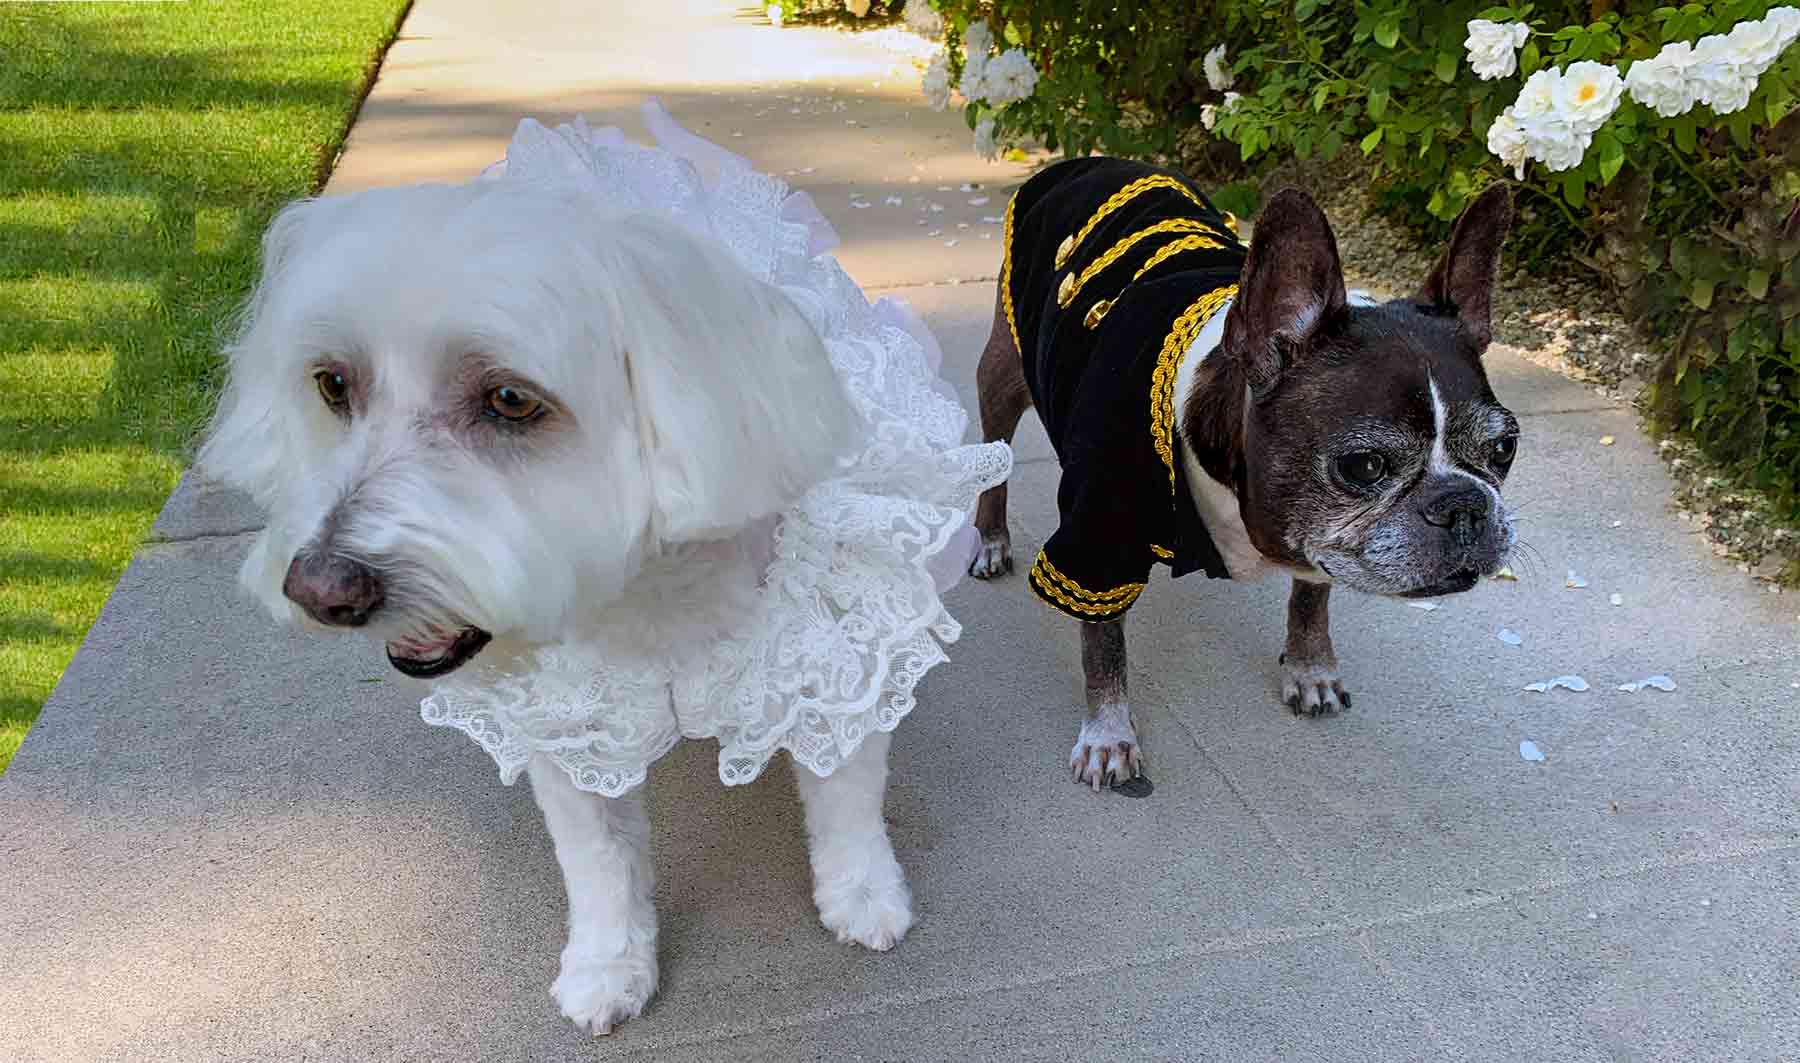 Willow (Havanese mix) and Dilla (French Bulldog and Boston Terrier mix) wearing their Sunday's Best: Vintage Elizabethan Dog Wedding Dress and Black & Gold Velvet Embroidered Tuxedo Jacket for Dogs from online dog clothing store they made me wear it.